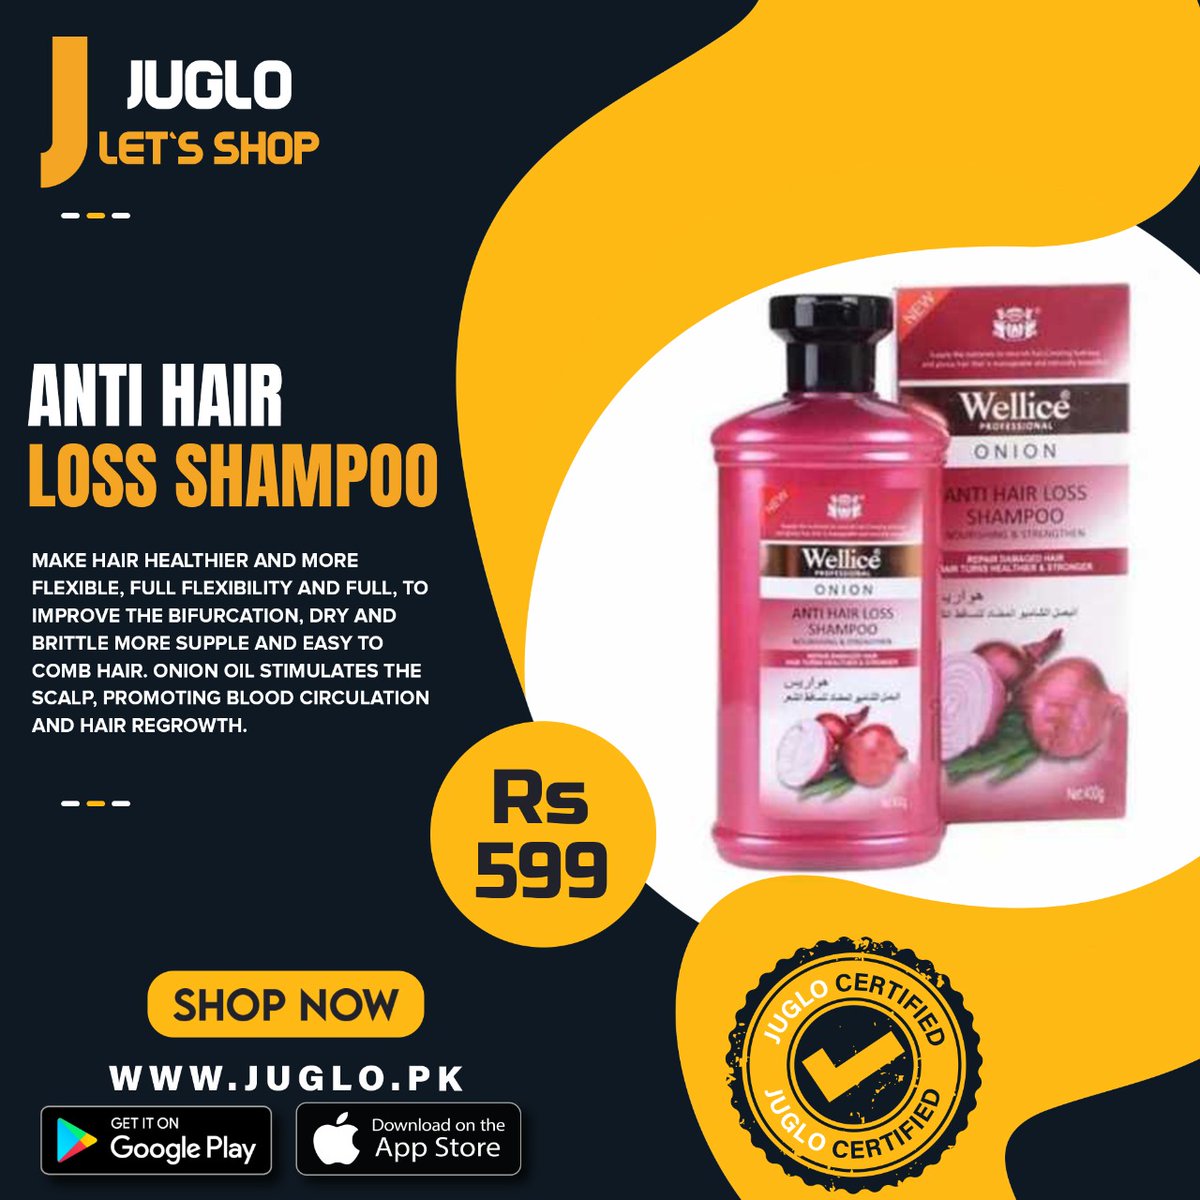 Make Your Hair Stronger and Happier with Wellice Onion Shampoo...
The Perfect Diet of Your Hair!!!
juglo.pk/wellice-onion-…
#juglopk #shopping #onlineshopping #shampoo #onionshampoo #stronghair #silkyhair #antihairloss #healthyhair